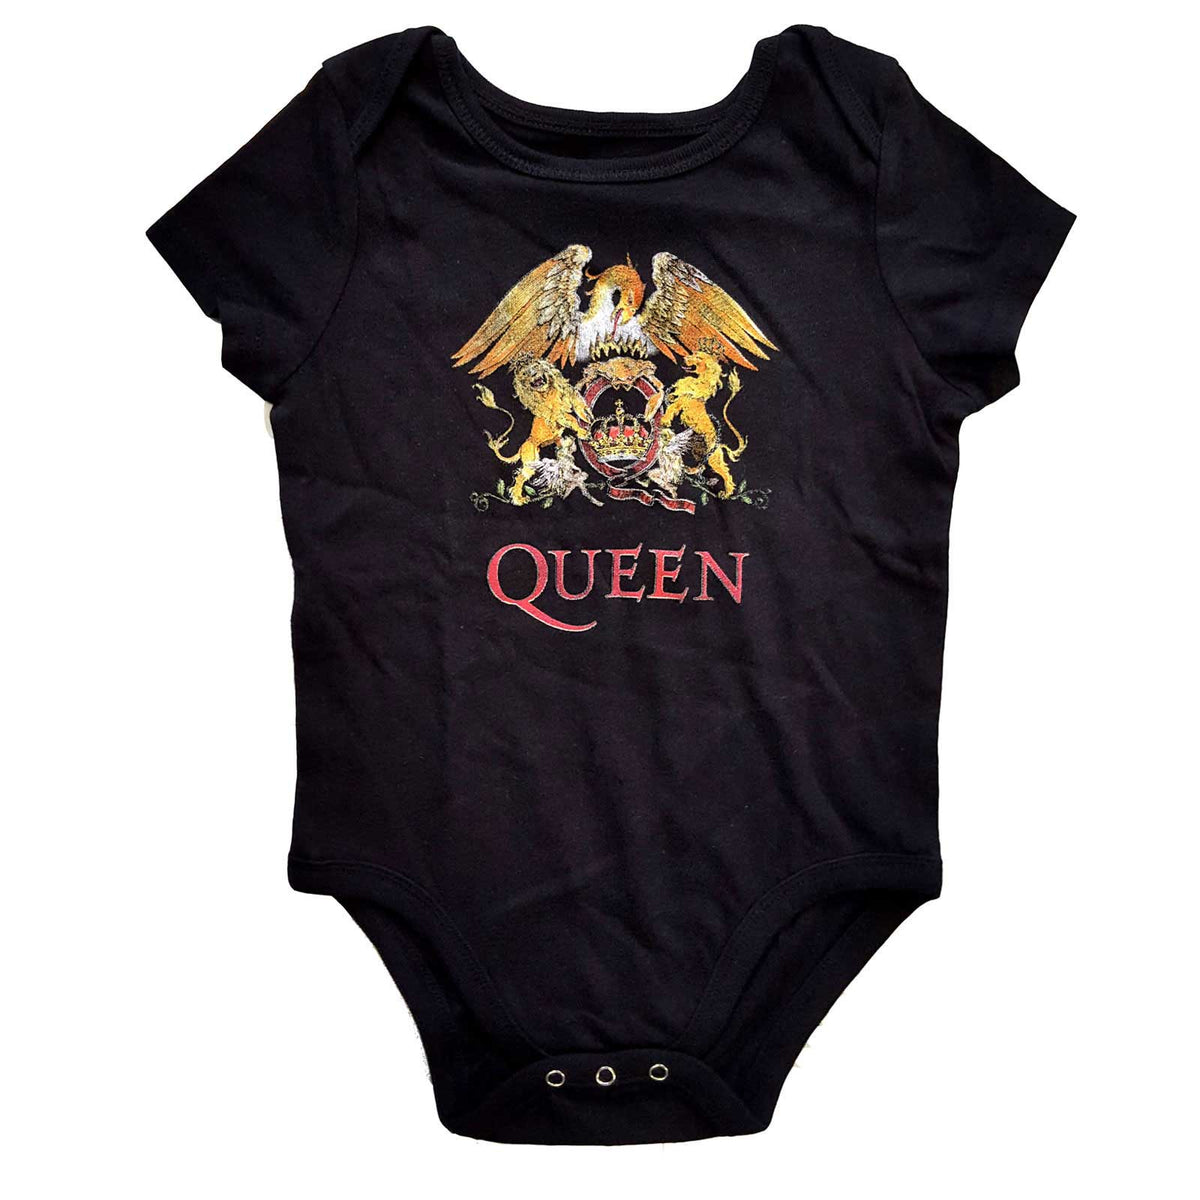 Queen Kids Baby Grow - Classic Crest - Official Licensed Product